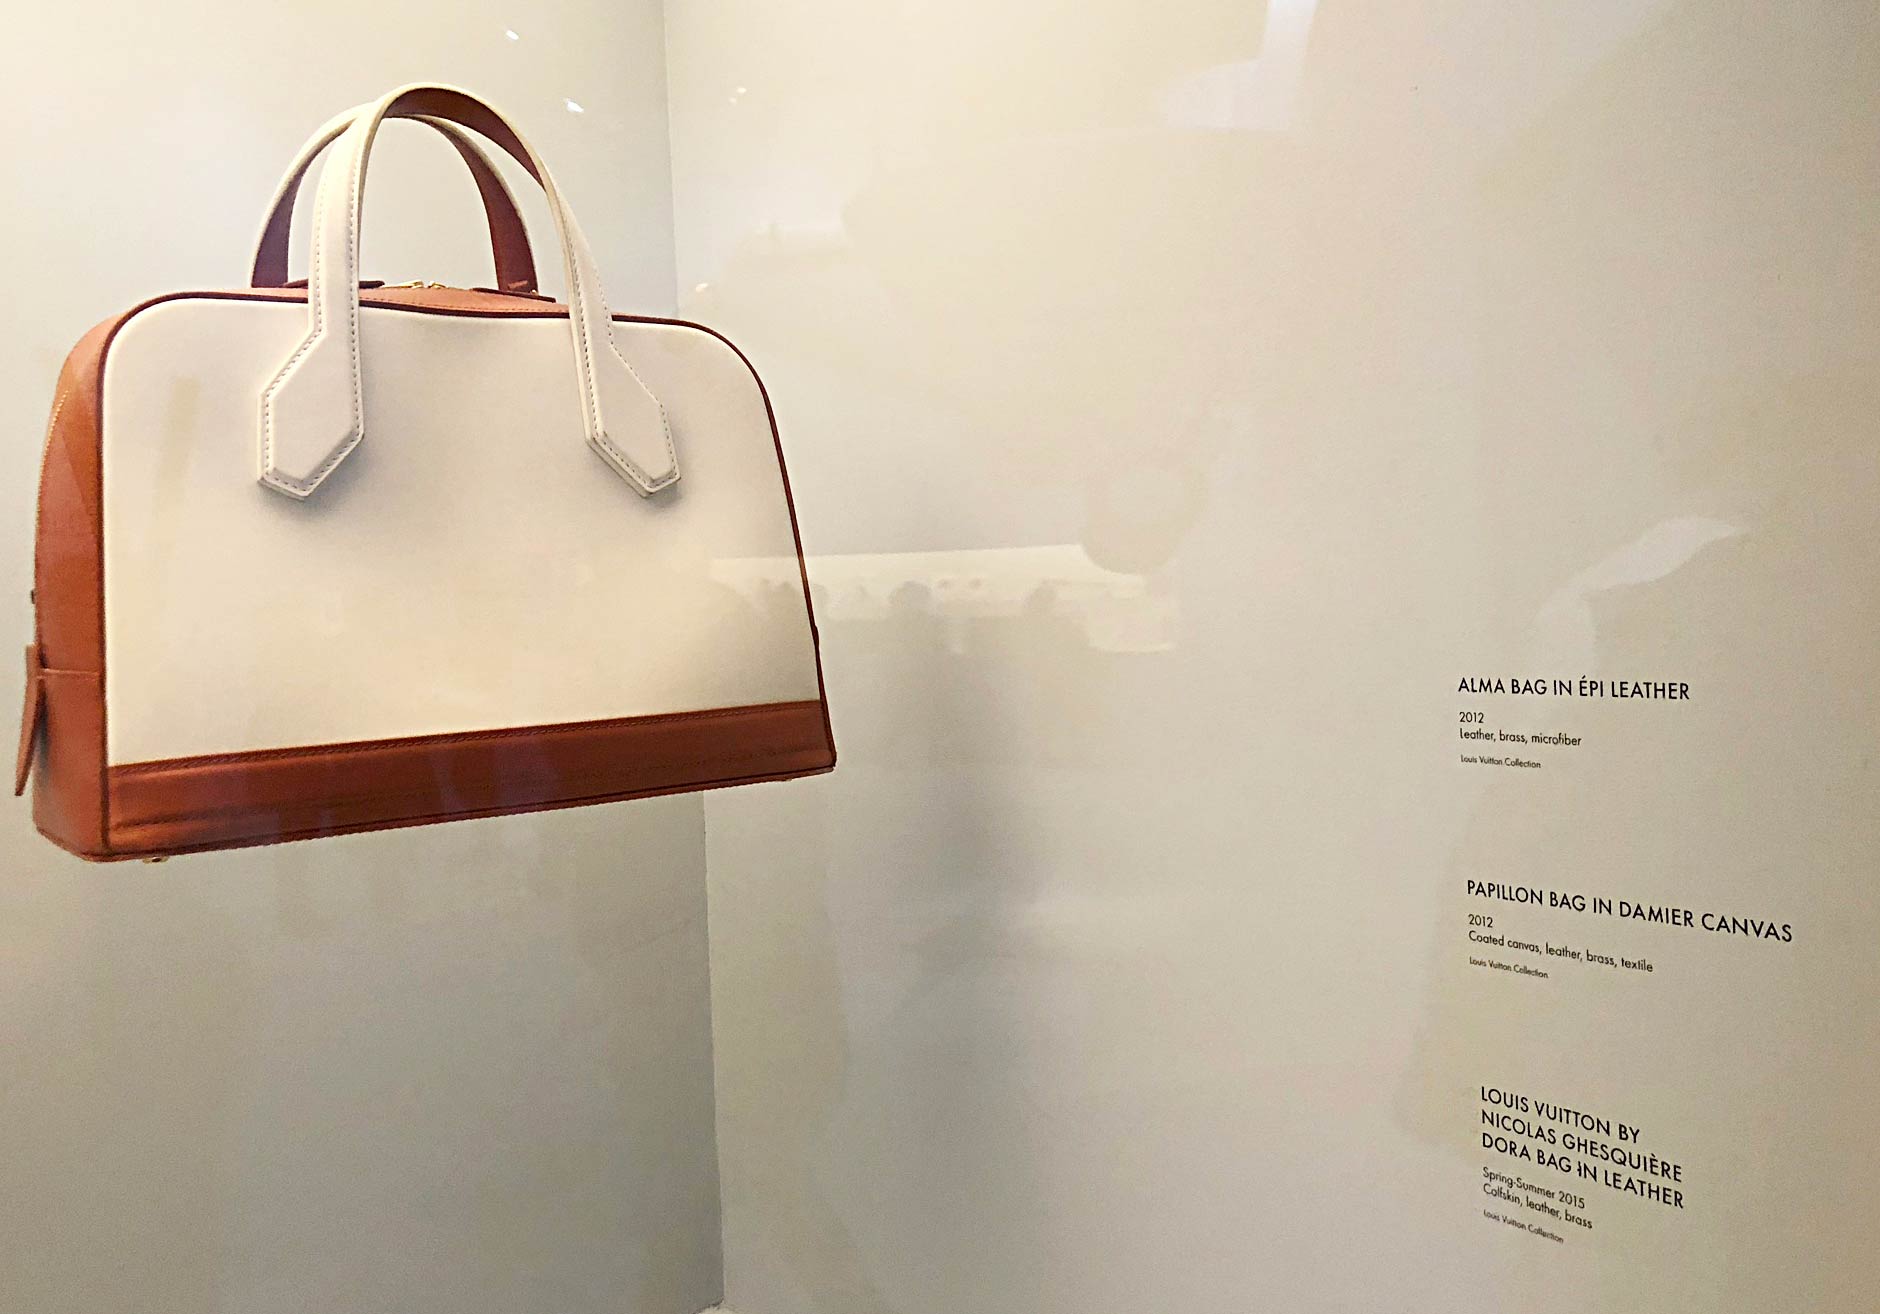 Louis Vuitton - Volez, Voguez, Voyagez exhibit, New York, NY. A leather, brass and microfiber handbag with cream-colored leather and light-auburn bottom and sides. Custom dry transfers are applied to the wall and used as descriptions for the piece.